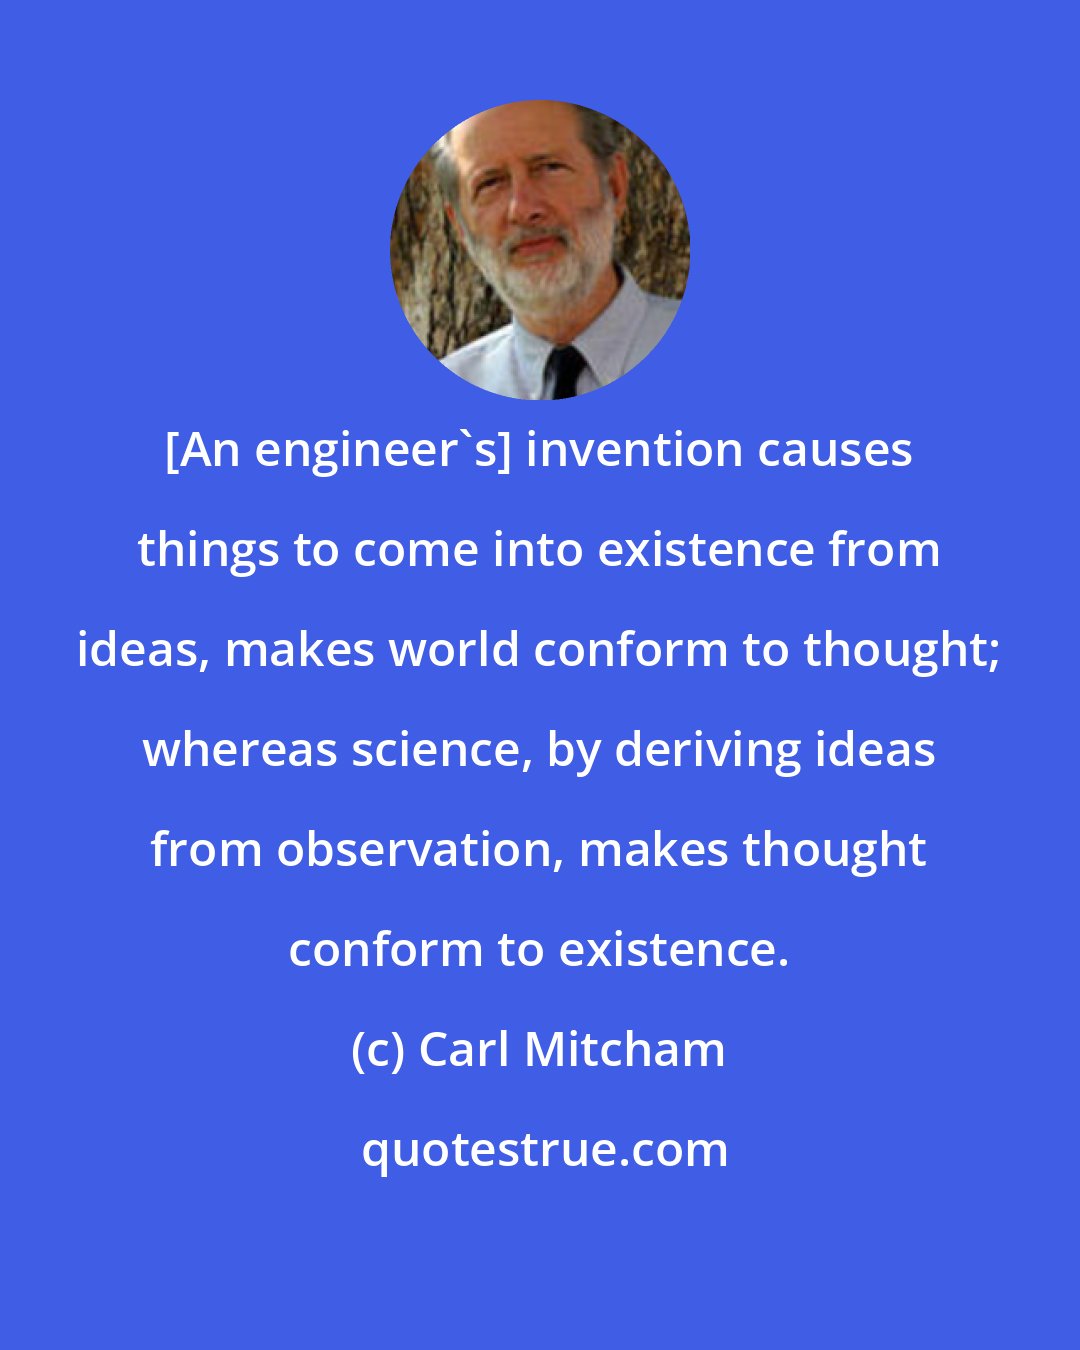 Carl Mitcham: [An engineer's] invention causes things to come into existence from ideas, makes world conform to thought; whereas science, by deriving ideas from observation, makes thought conform to existence.